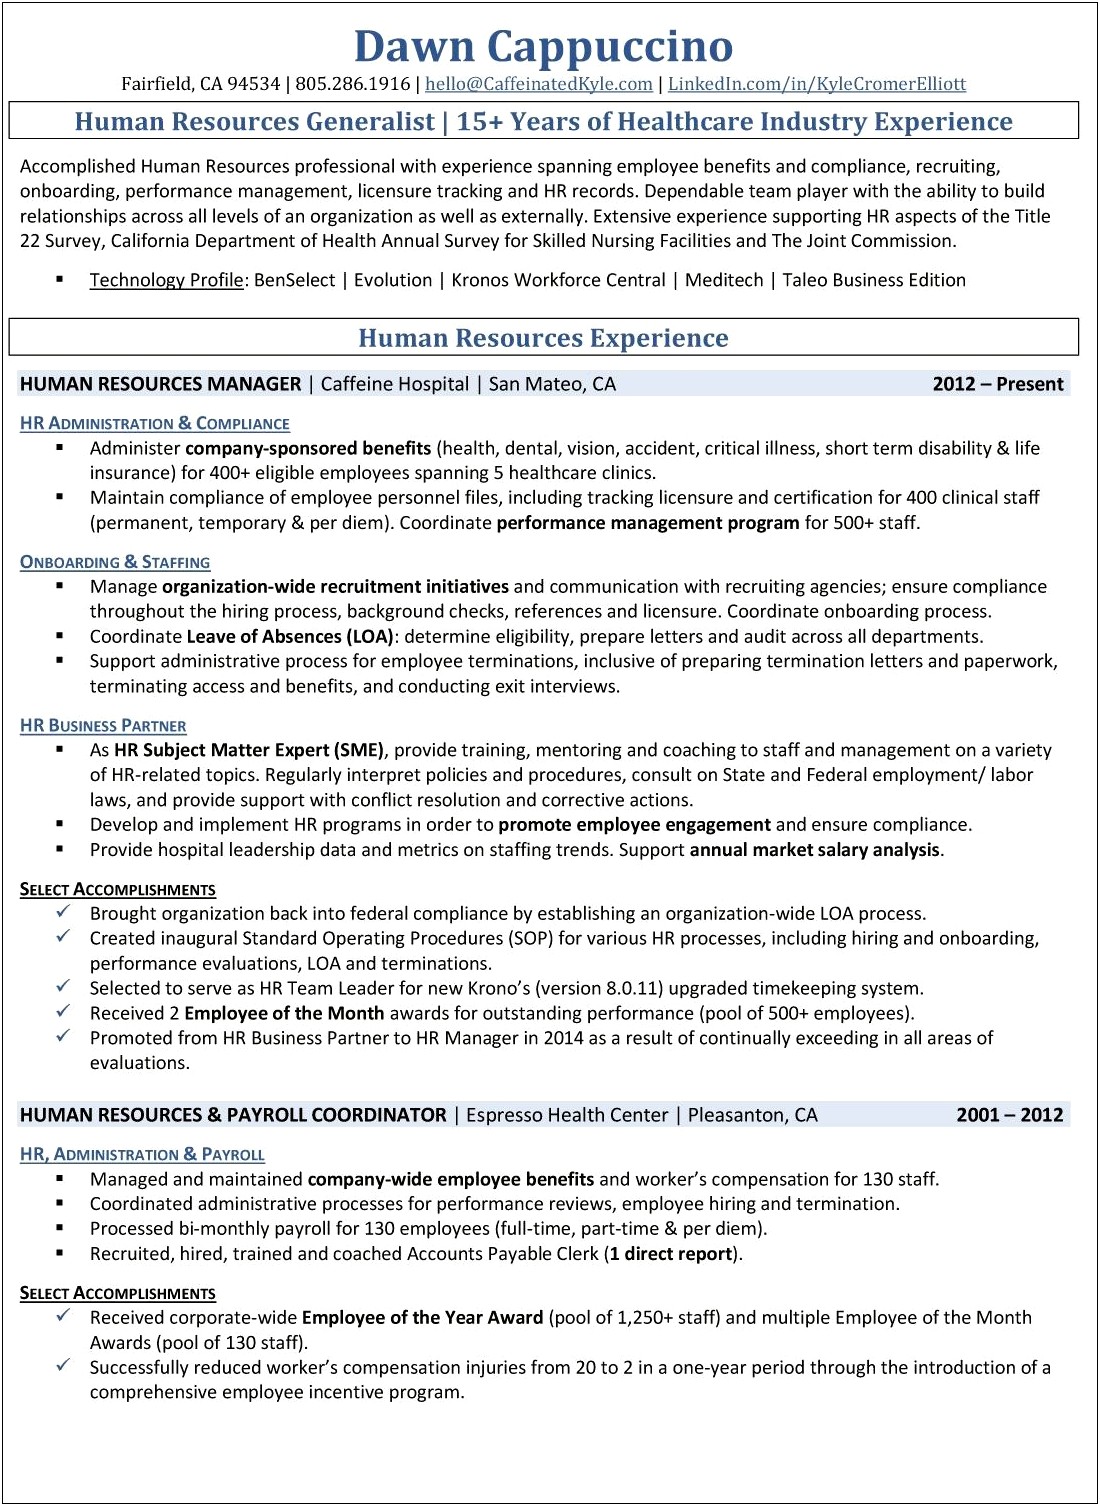 Healthcare Human Resources Manager Resume